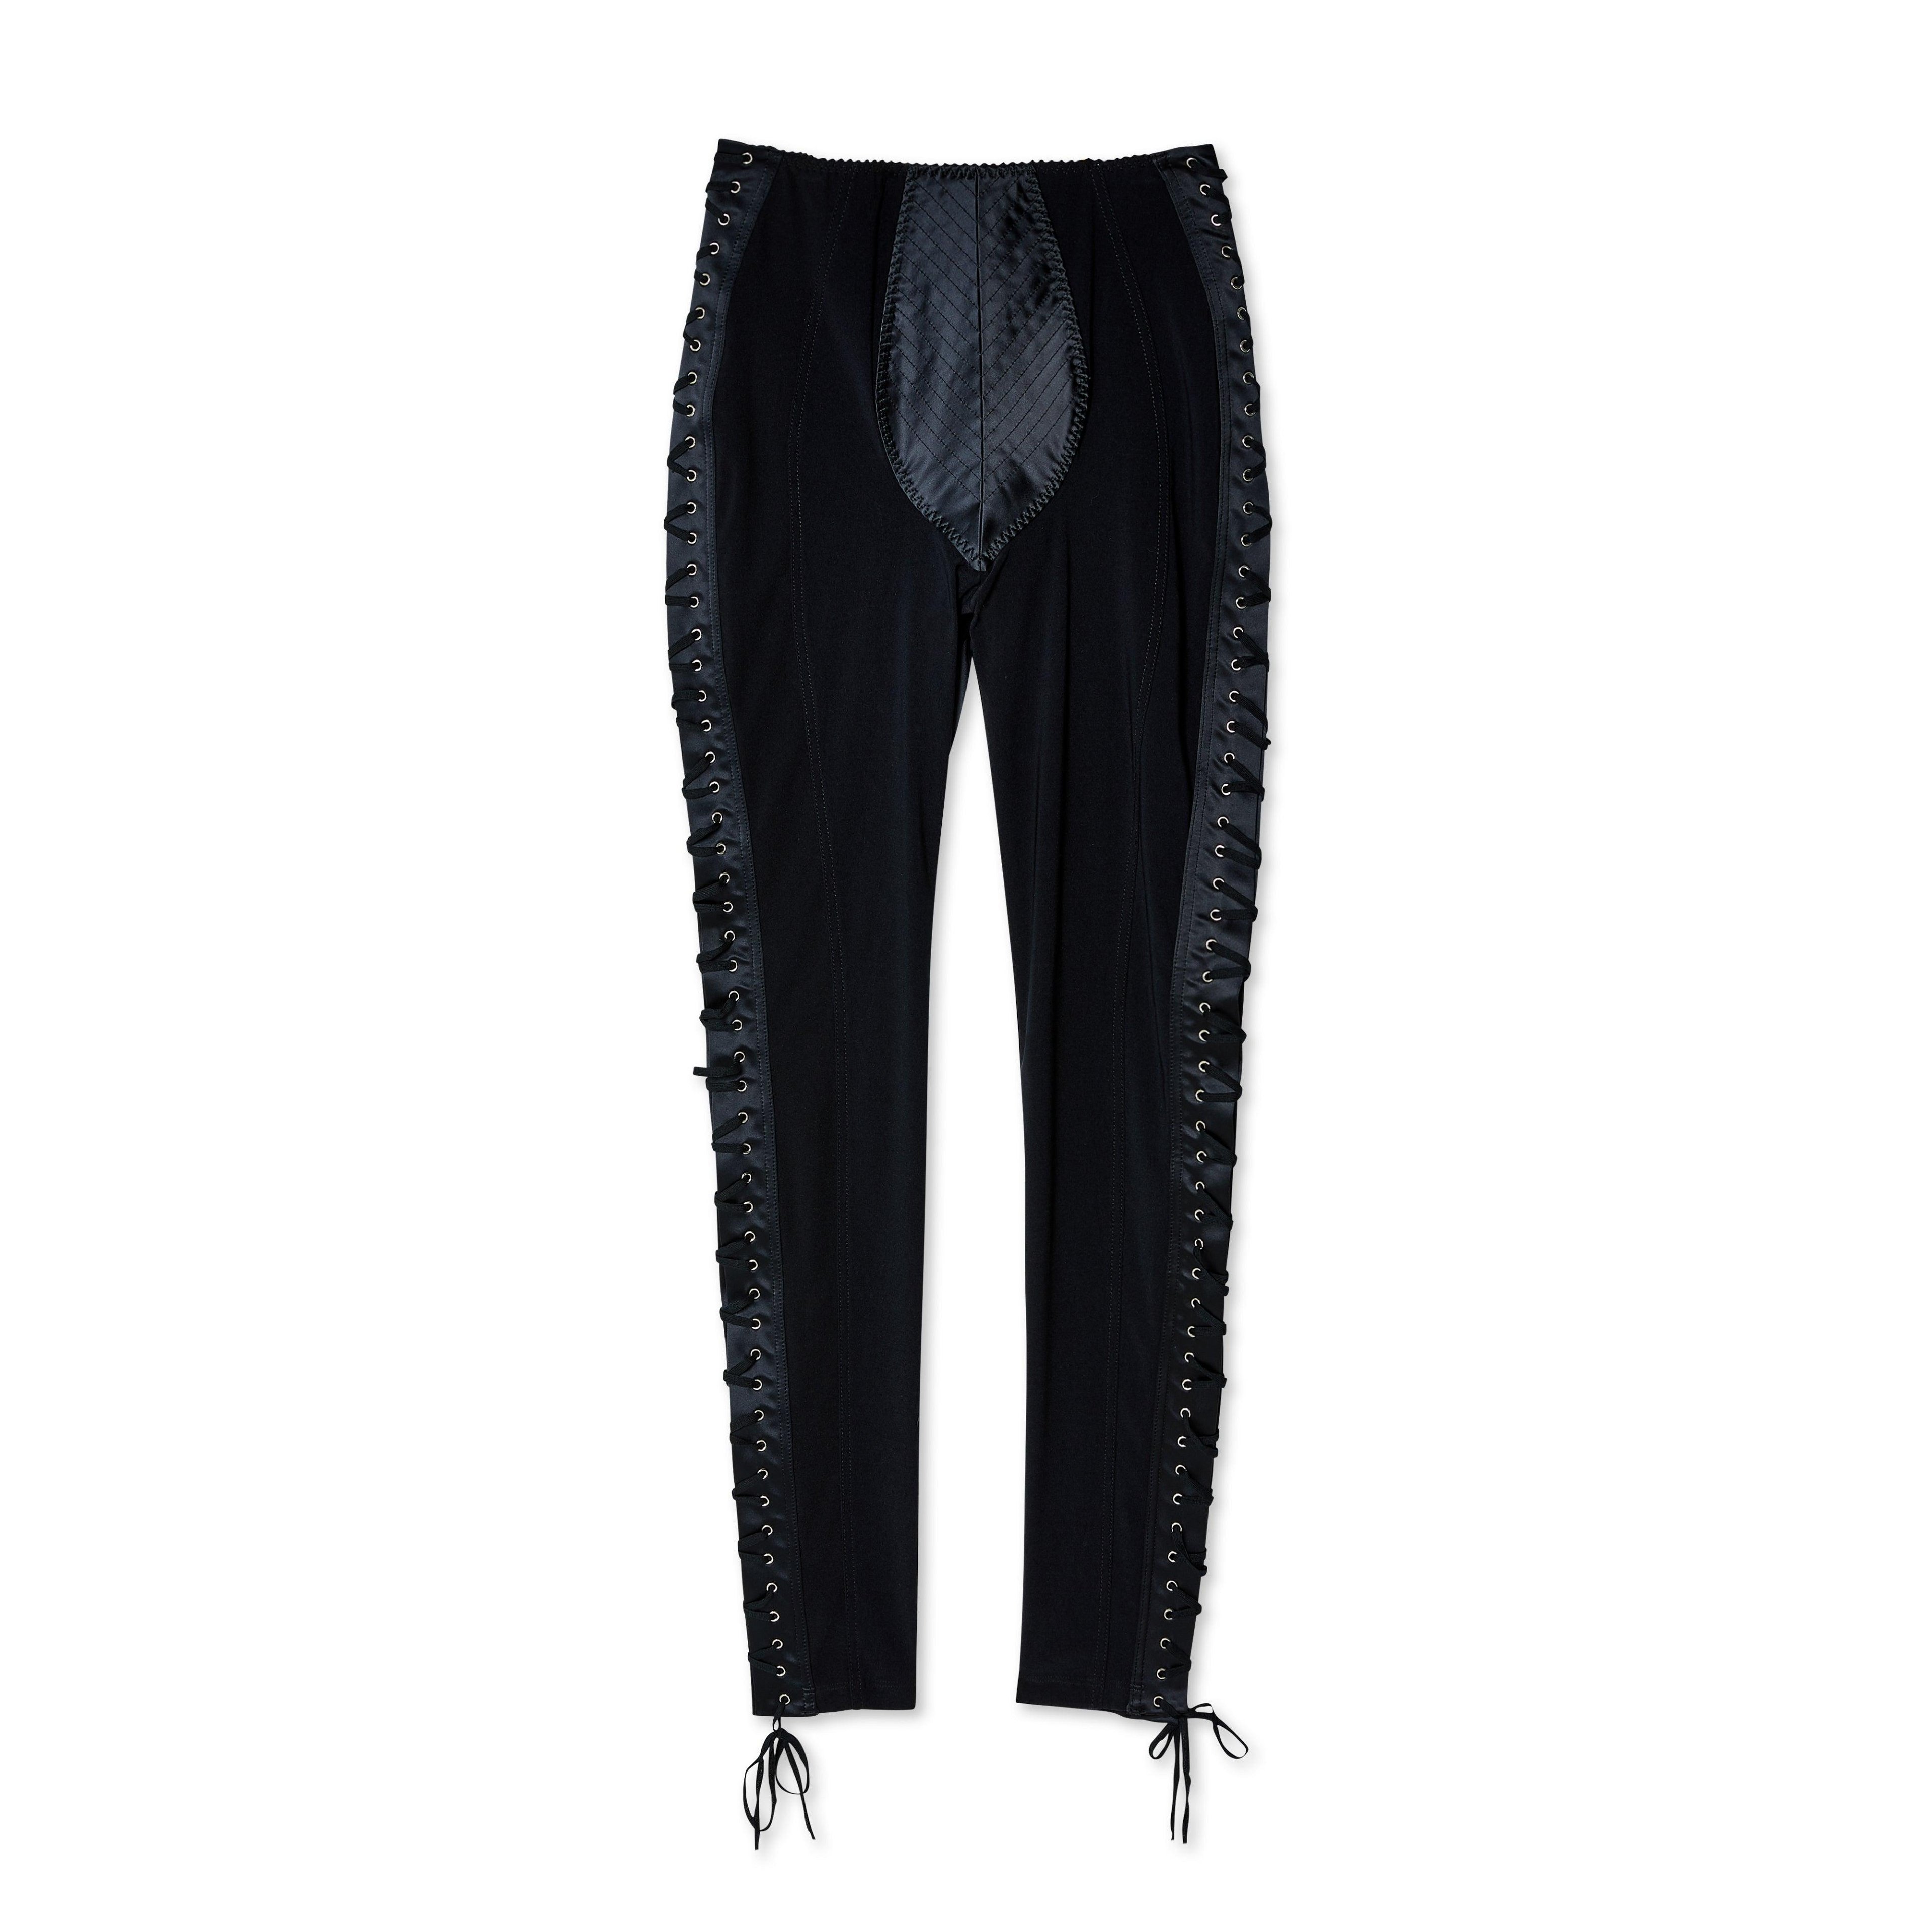 Jean Paul Gaultier - Lotta Volkova The Iconic Leggings With Topstitches Details - (Black) by JEAN PAUL GAULTIER